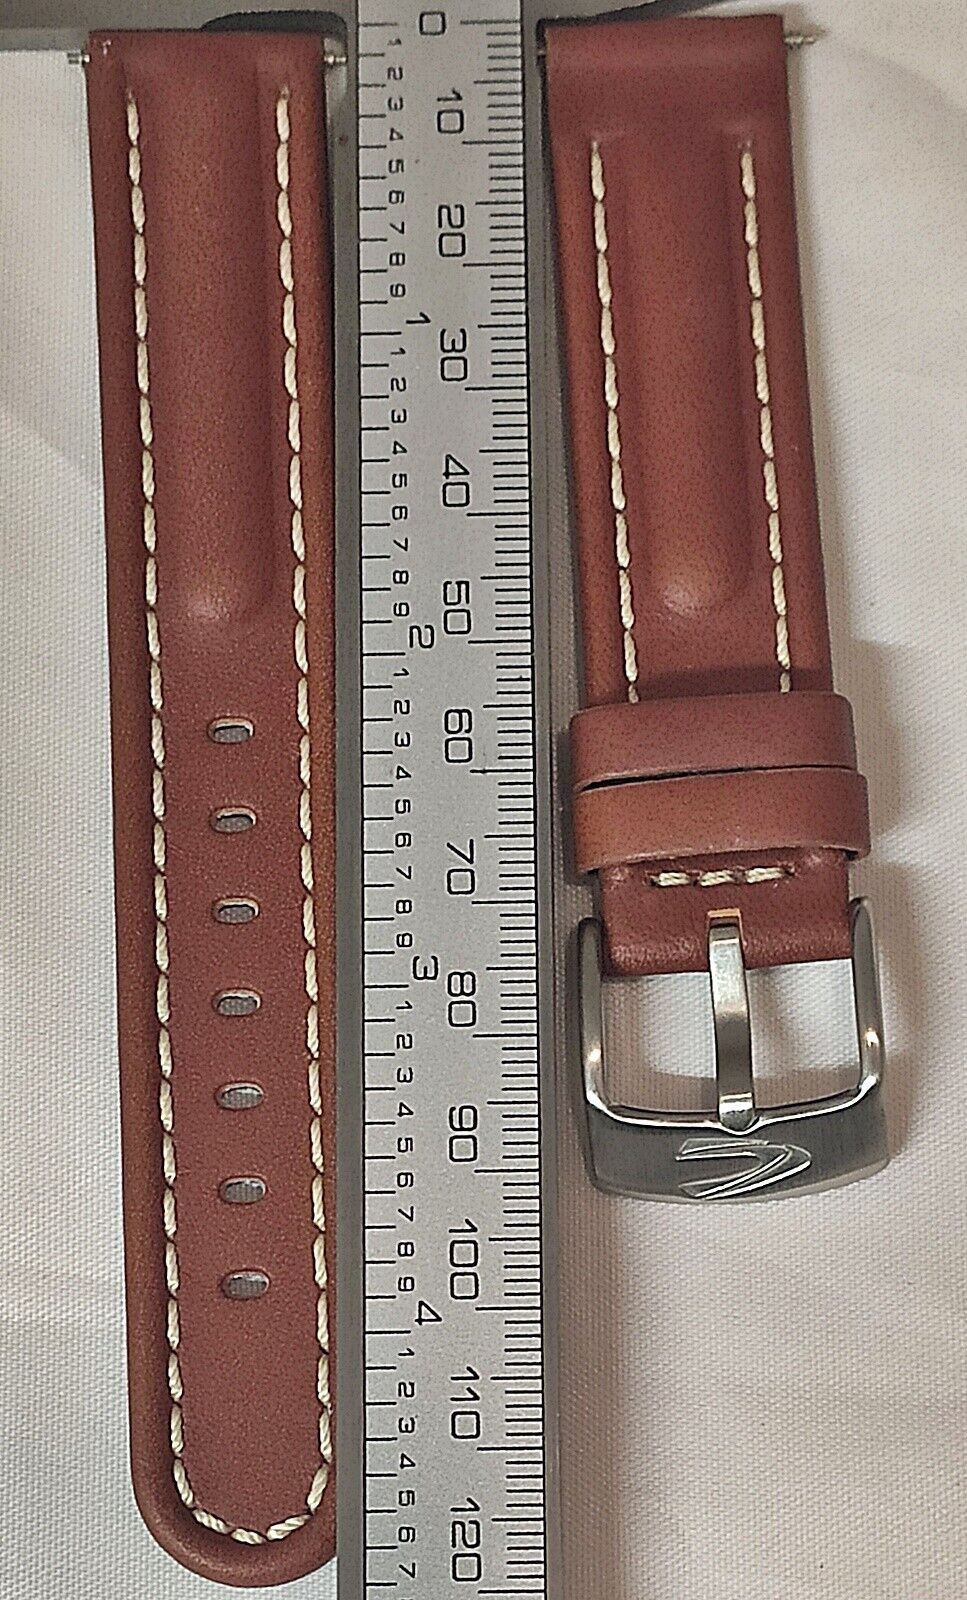 NEW Watch Strap 18mm Leather Brown Camel Active Series 6100 FE16418.70PA #201